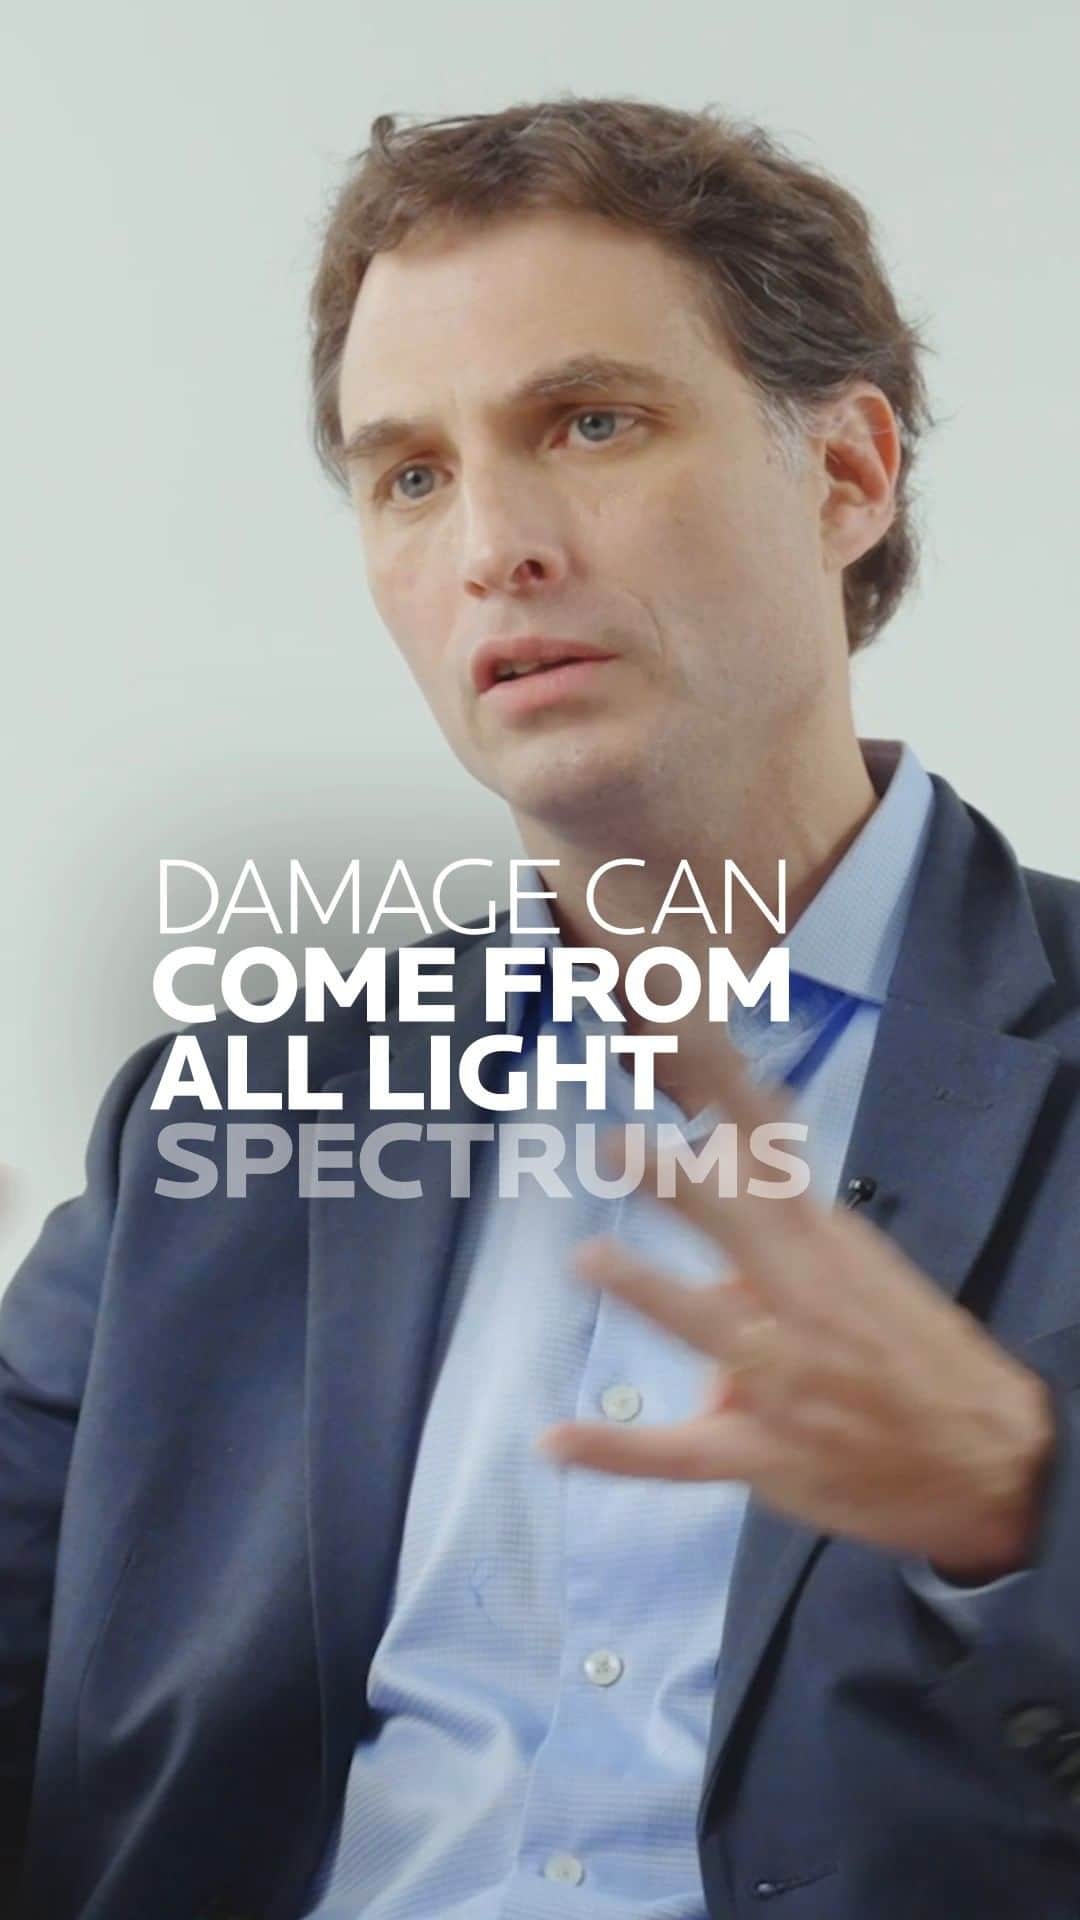 La Roche-Posayのインスタグラム：「Ageing is inevitable, but did you know the sun can speed it up? ☀️ Discover how to choose the right sunscreen to protect your skin from photodamage with Dr. Matias Maskin   All languages spoken here! Feel free to talk to us at anytime. #larocheposay #sunprotection #ageingskin Global official page from La Roche-Posay, France.」